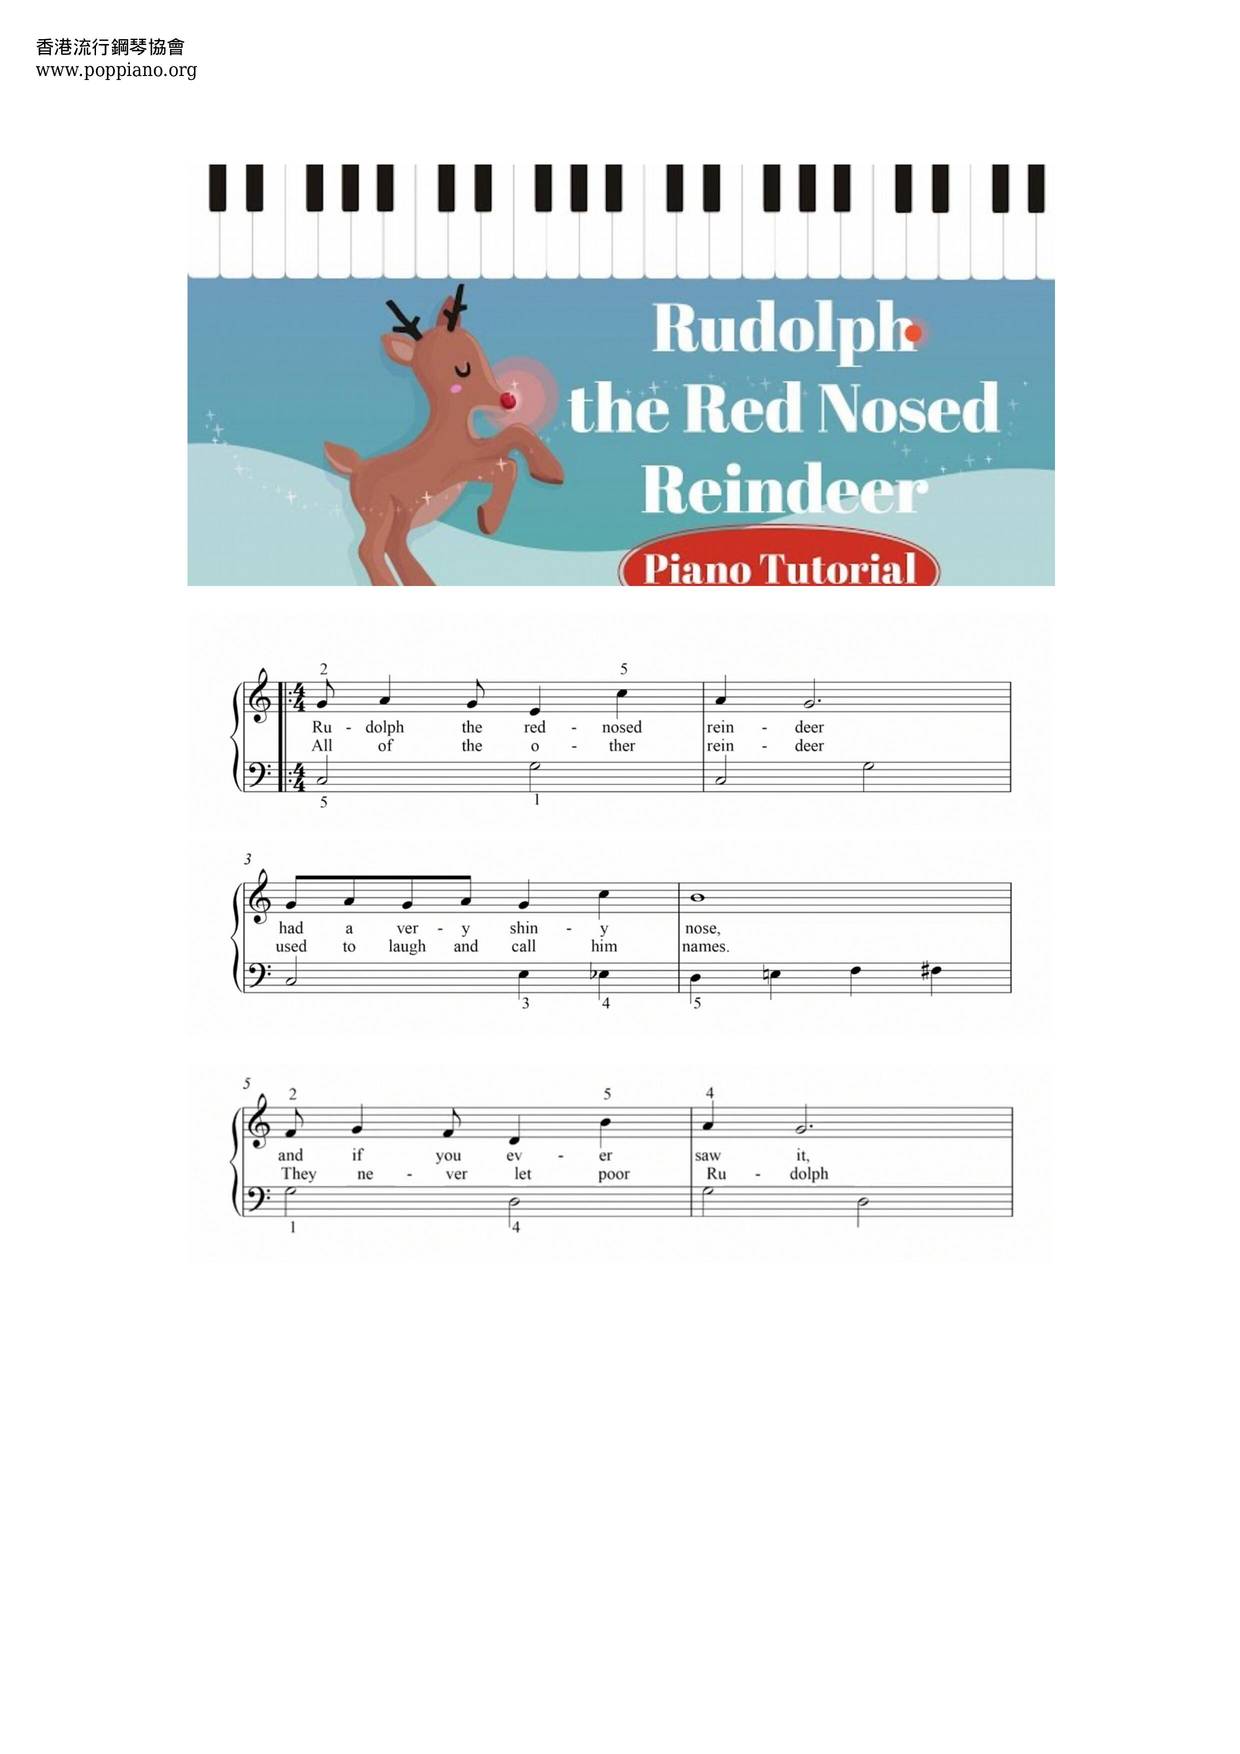 Rudolph The Red-Nosed Reindeer Score